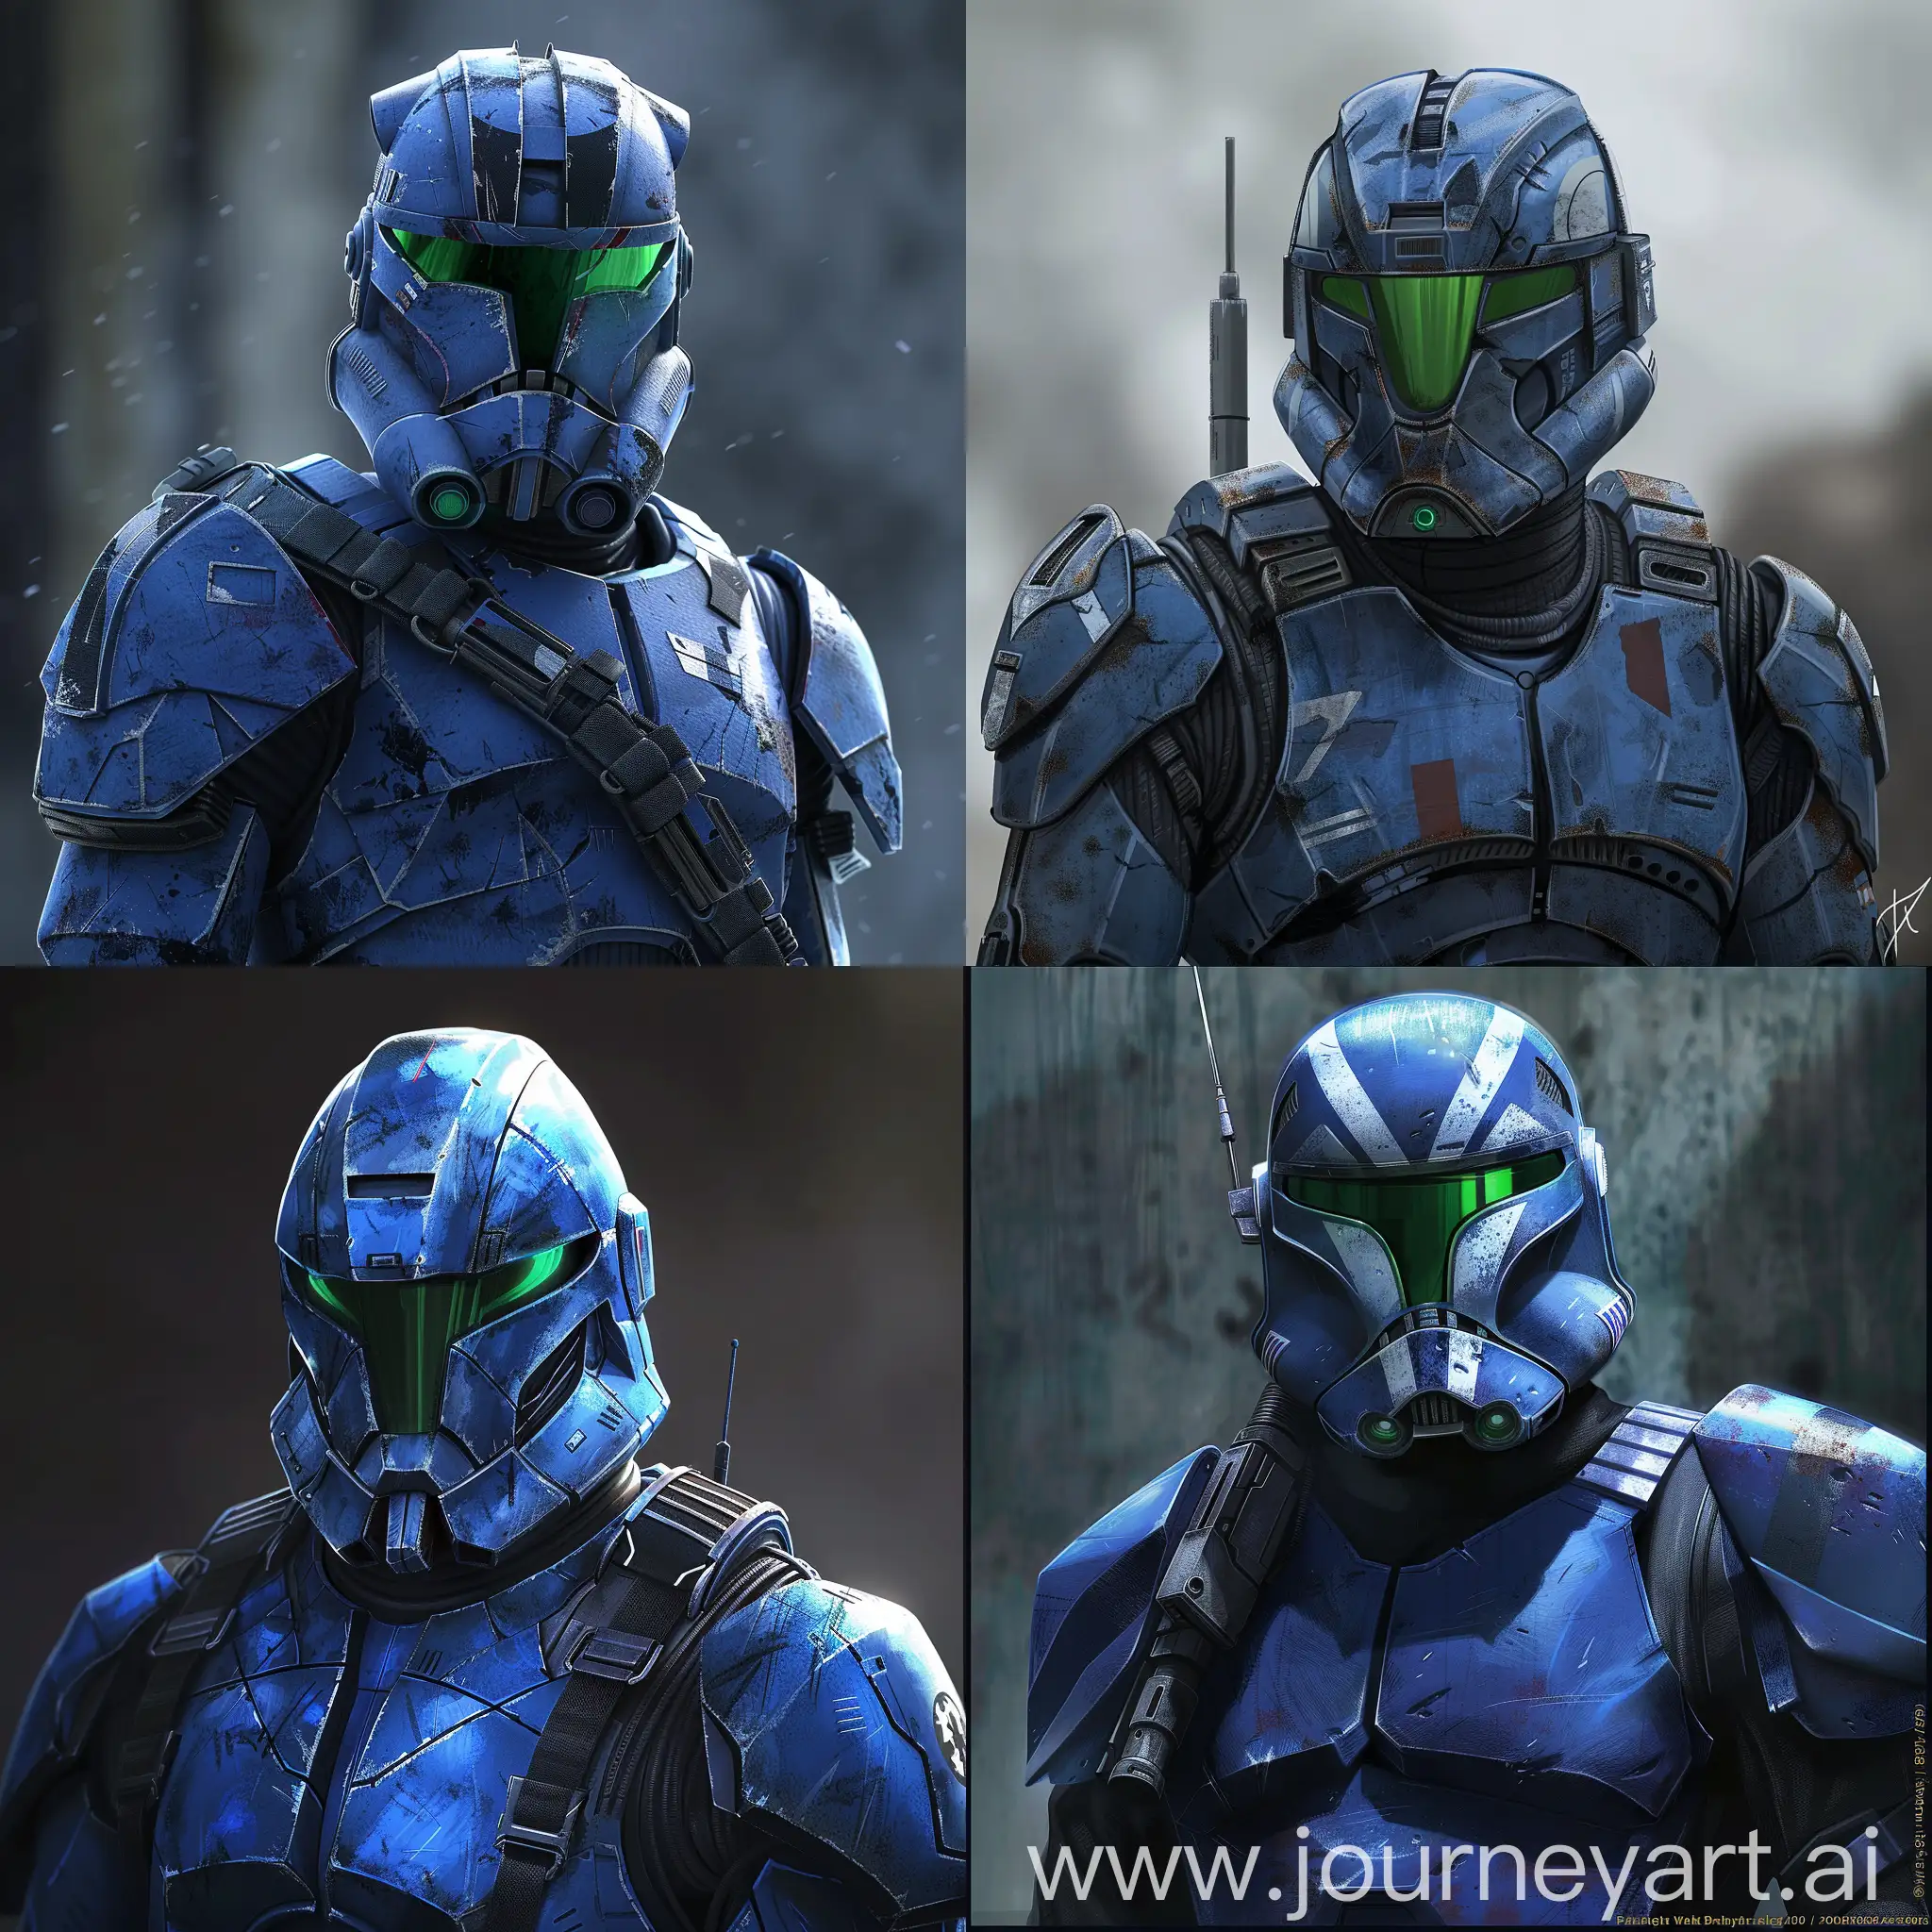 SciFi-Special-Task-Soldier-in-Blue-Armor-Concept-Art